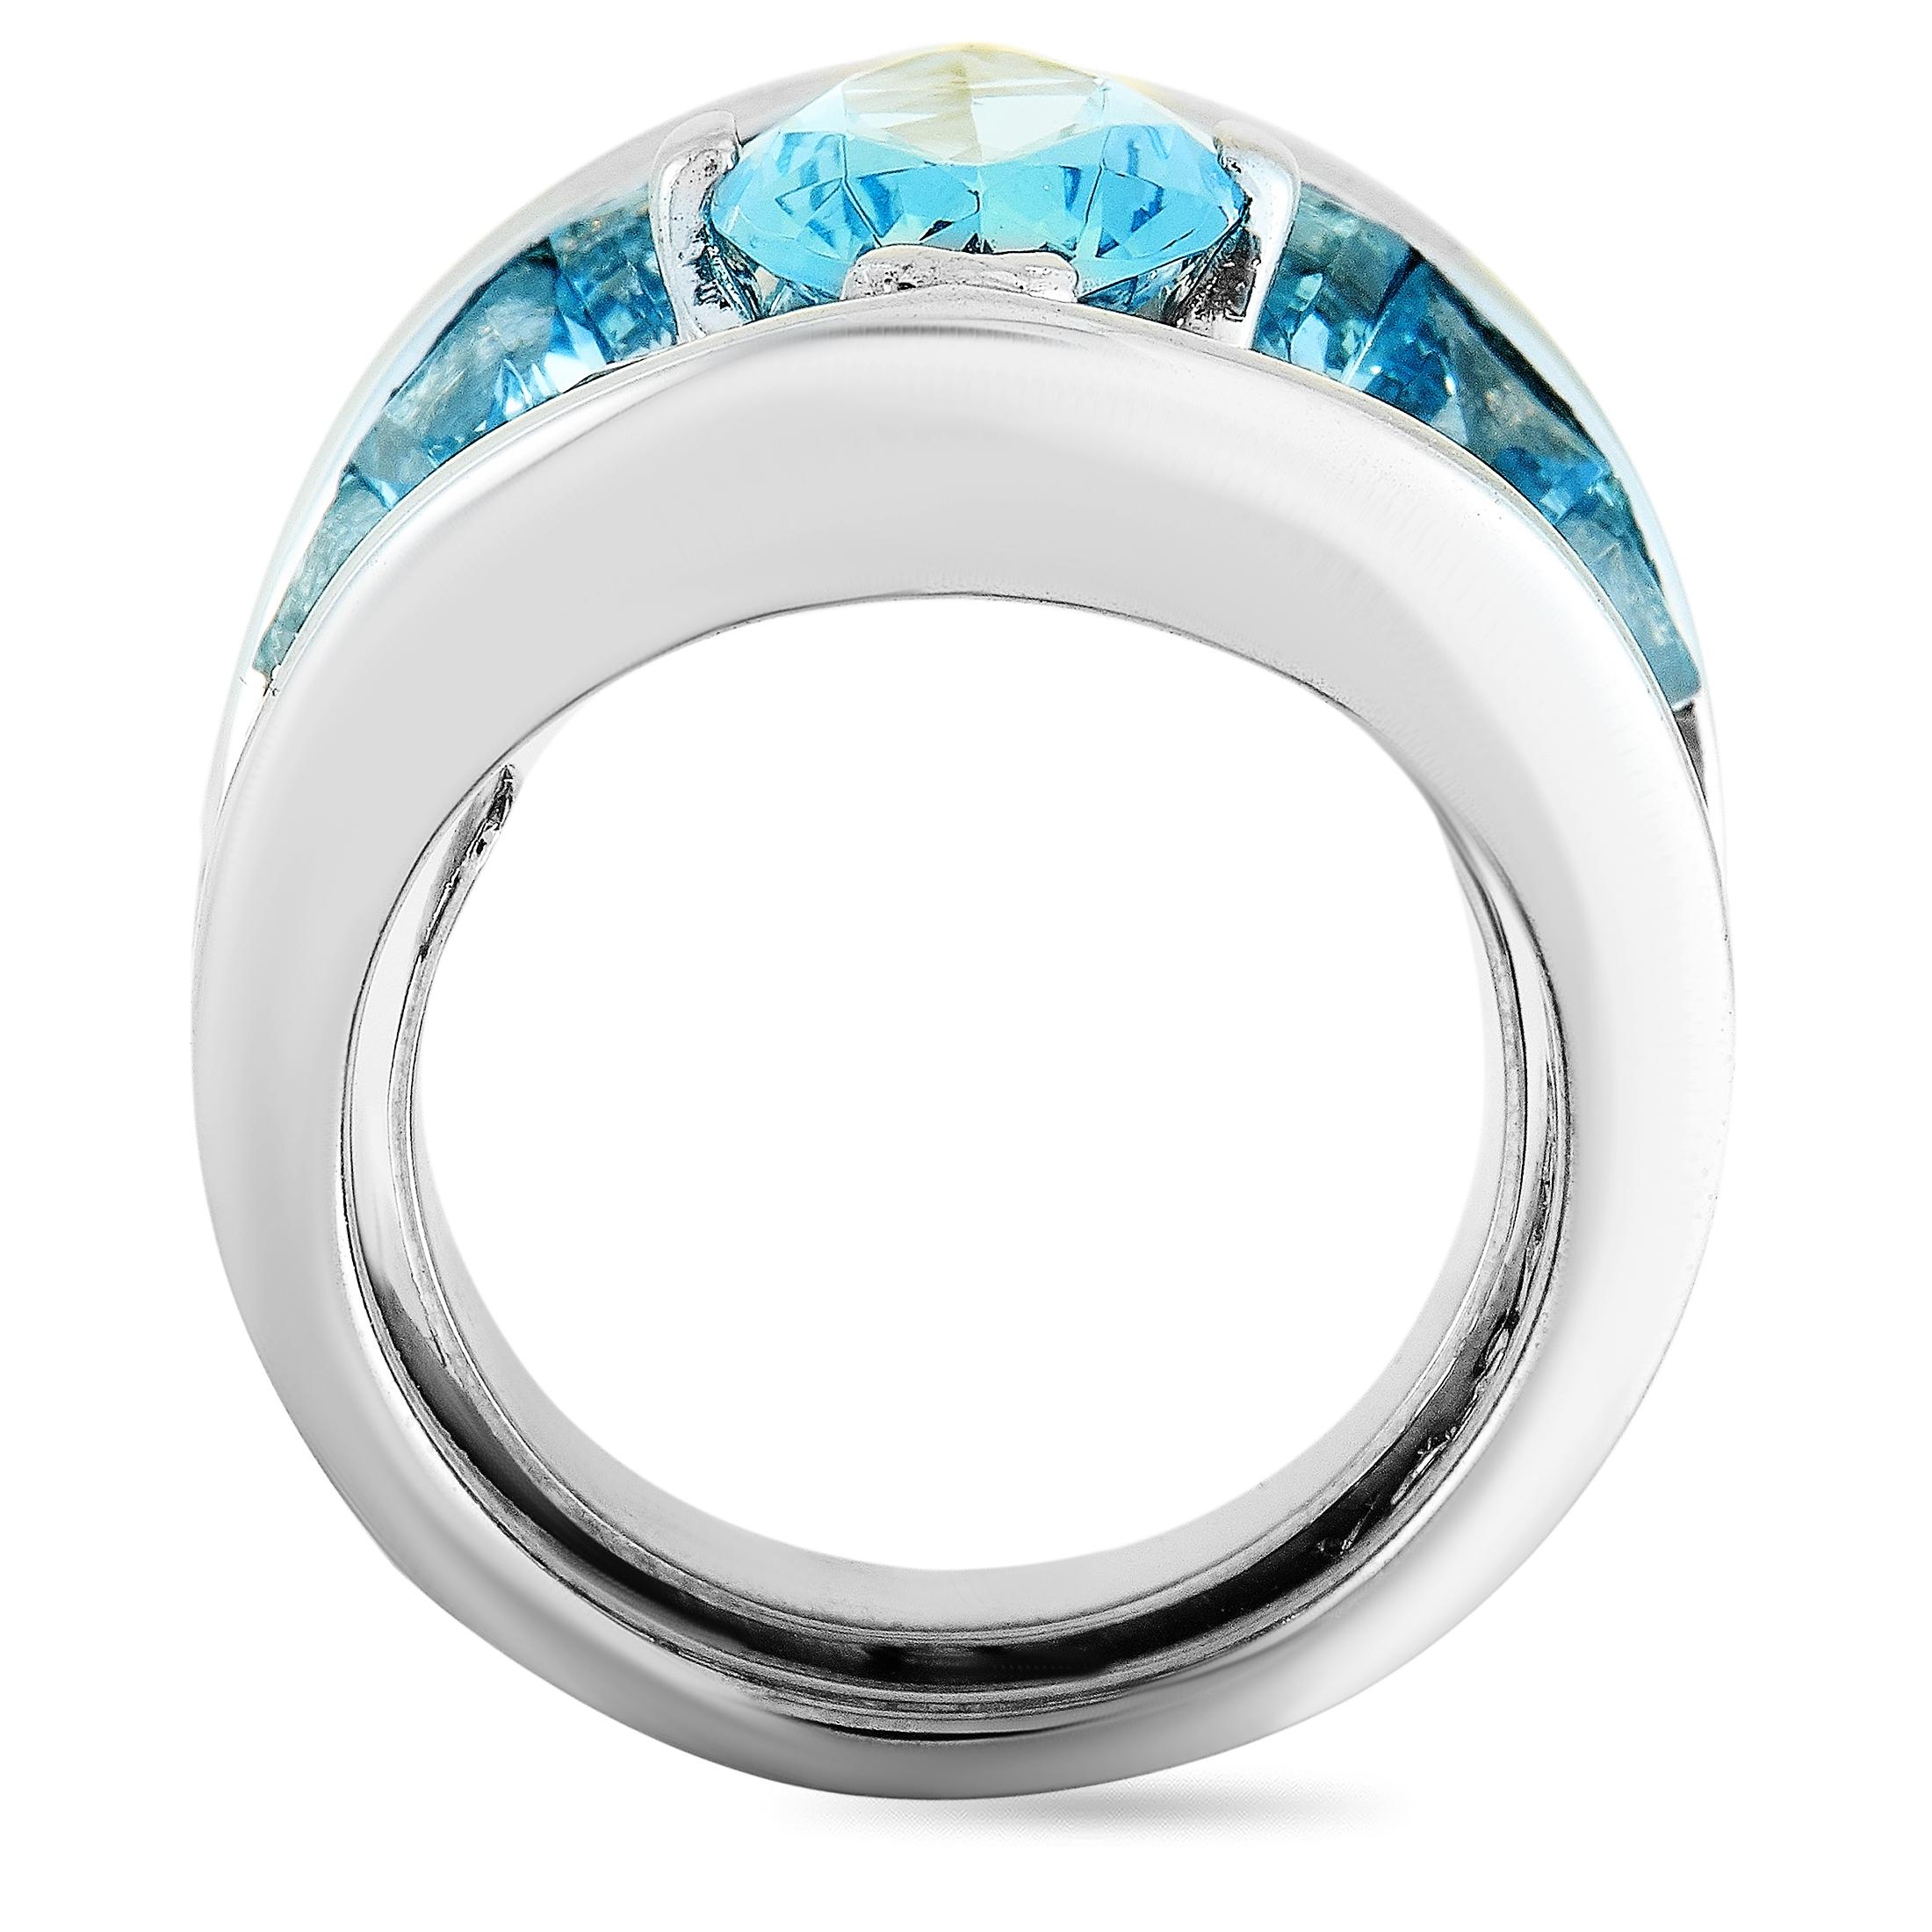 This Vasari ring is made of 18K white gold and set with aquamarines that amount to approximately 8.50 carats. The ring weighs 18.7 grams and boasts band thickness of 6 mm and top height of 6 mm, while top dimensions measure 22 by 18 mm.
 
Offered in